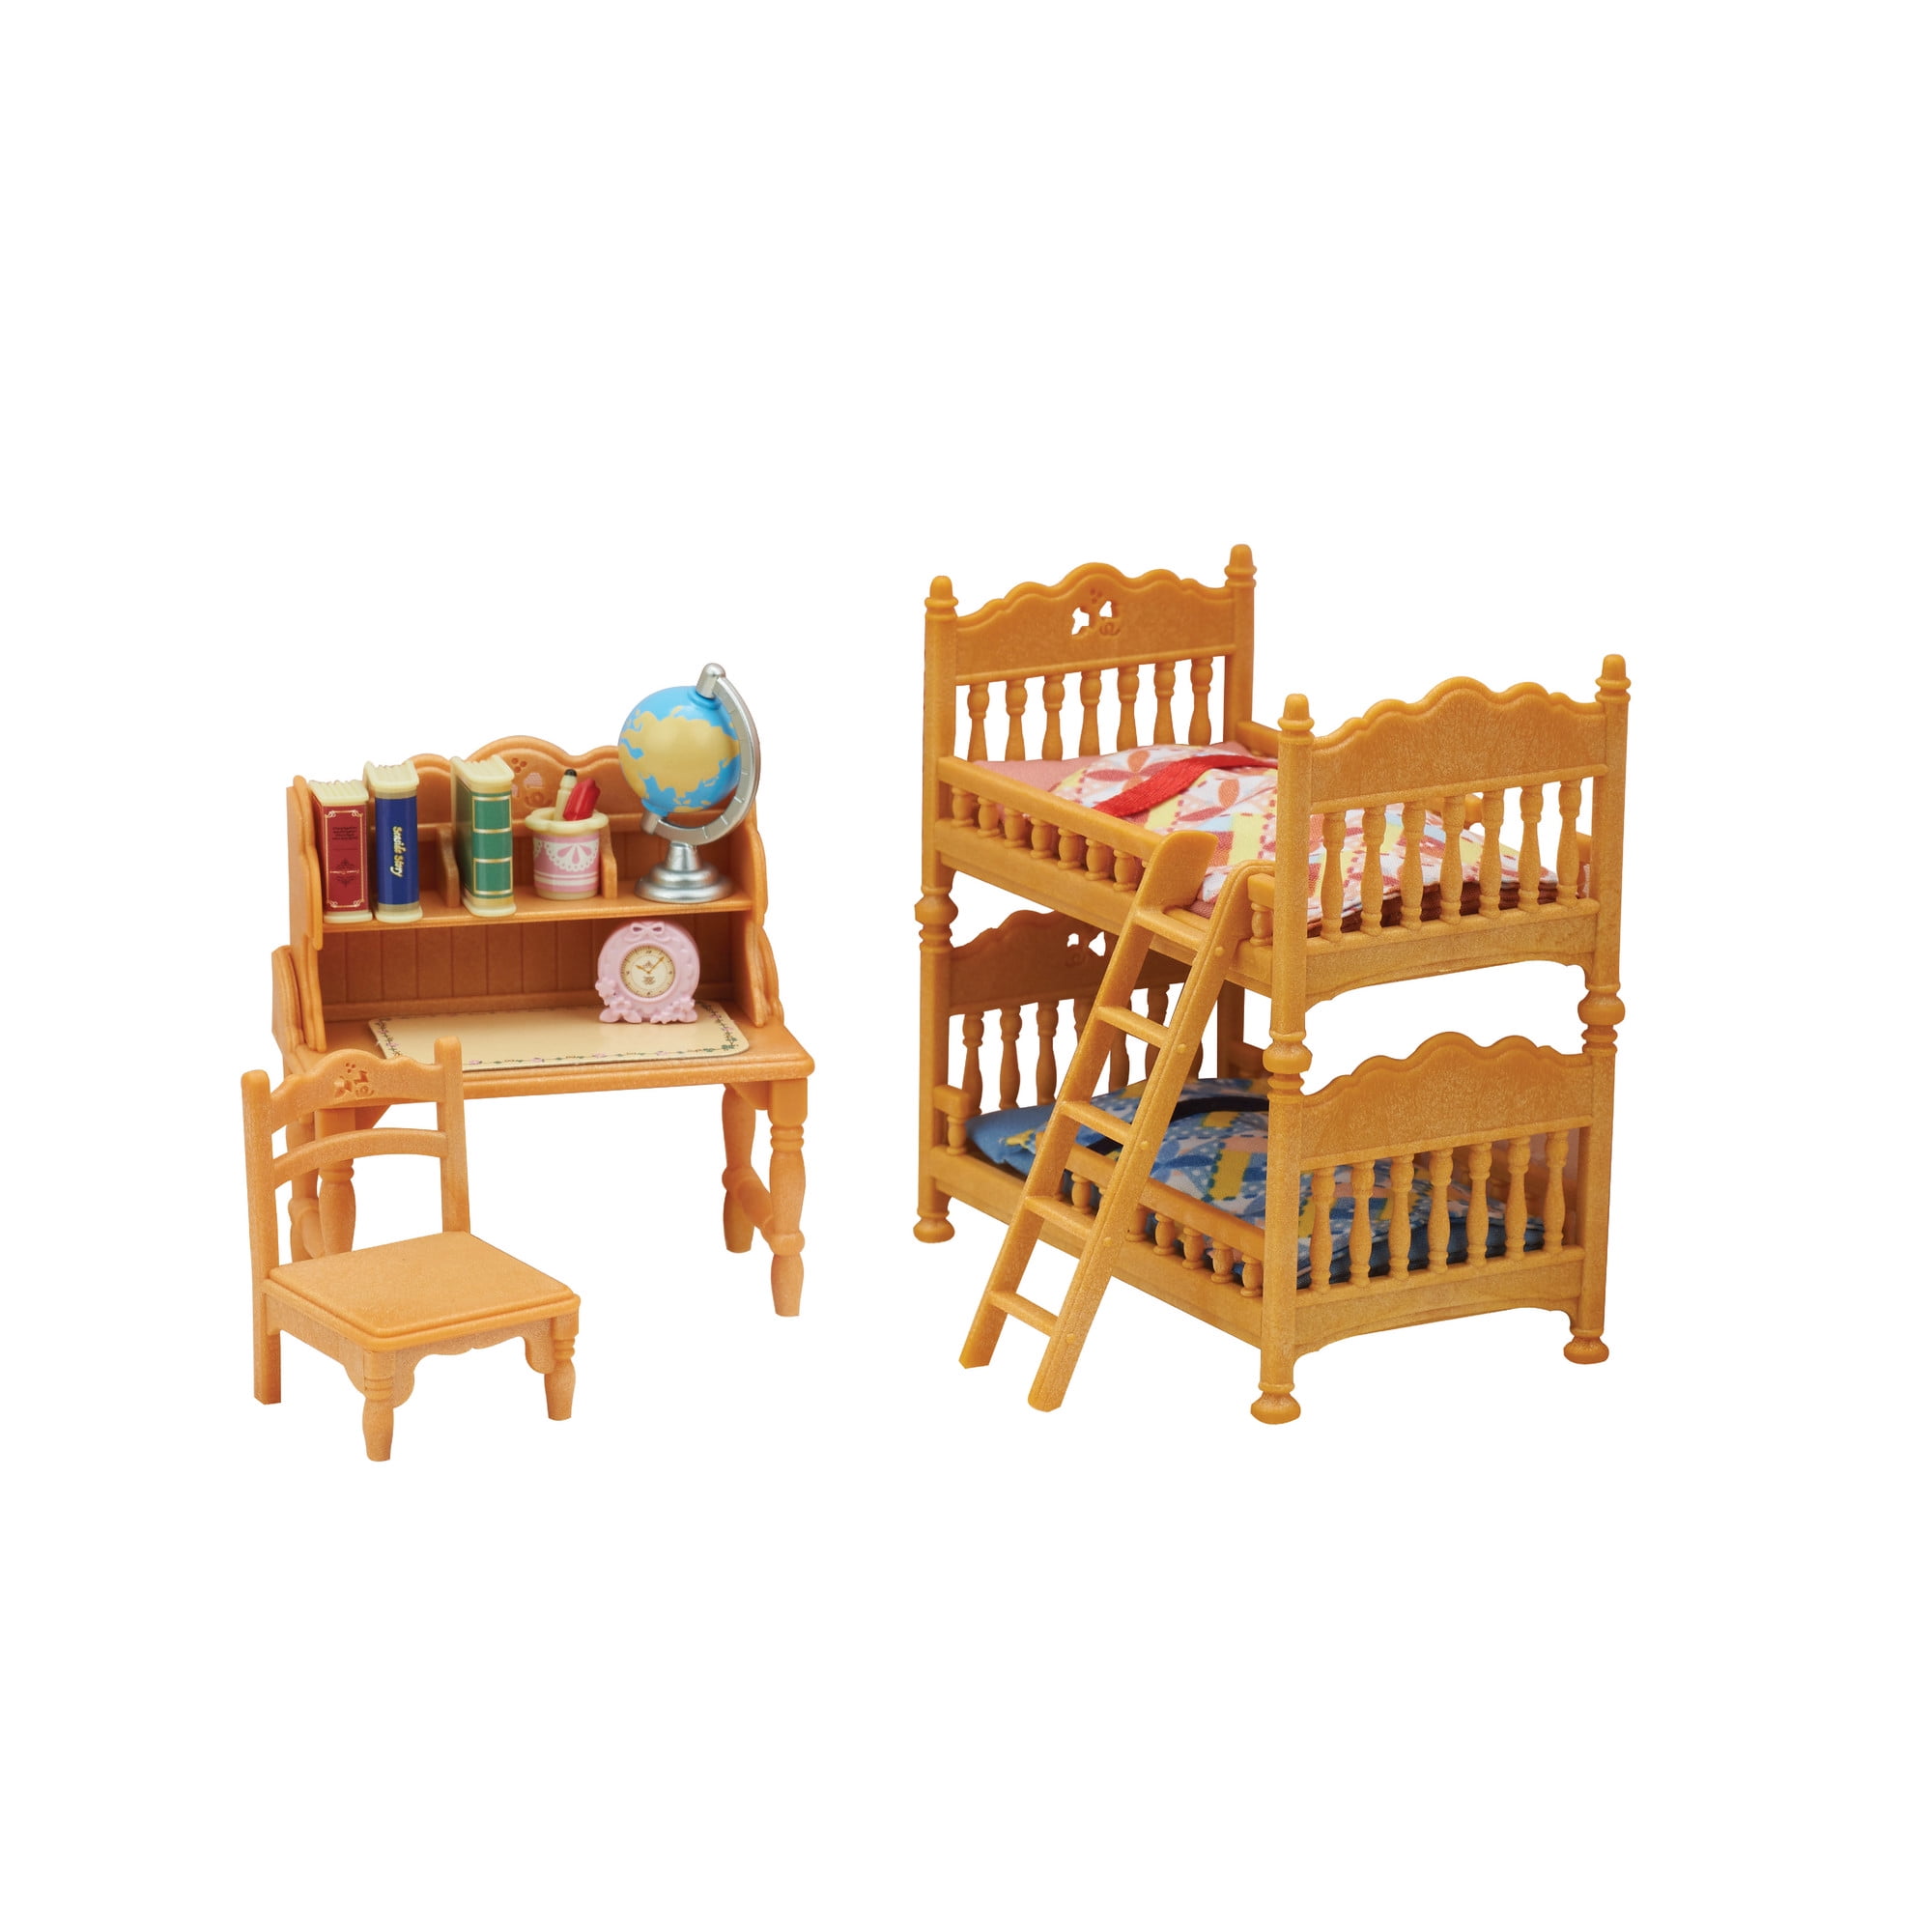 New Calico Critters Cozy Kozy Kitchen Set Doll House Furniture Food 